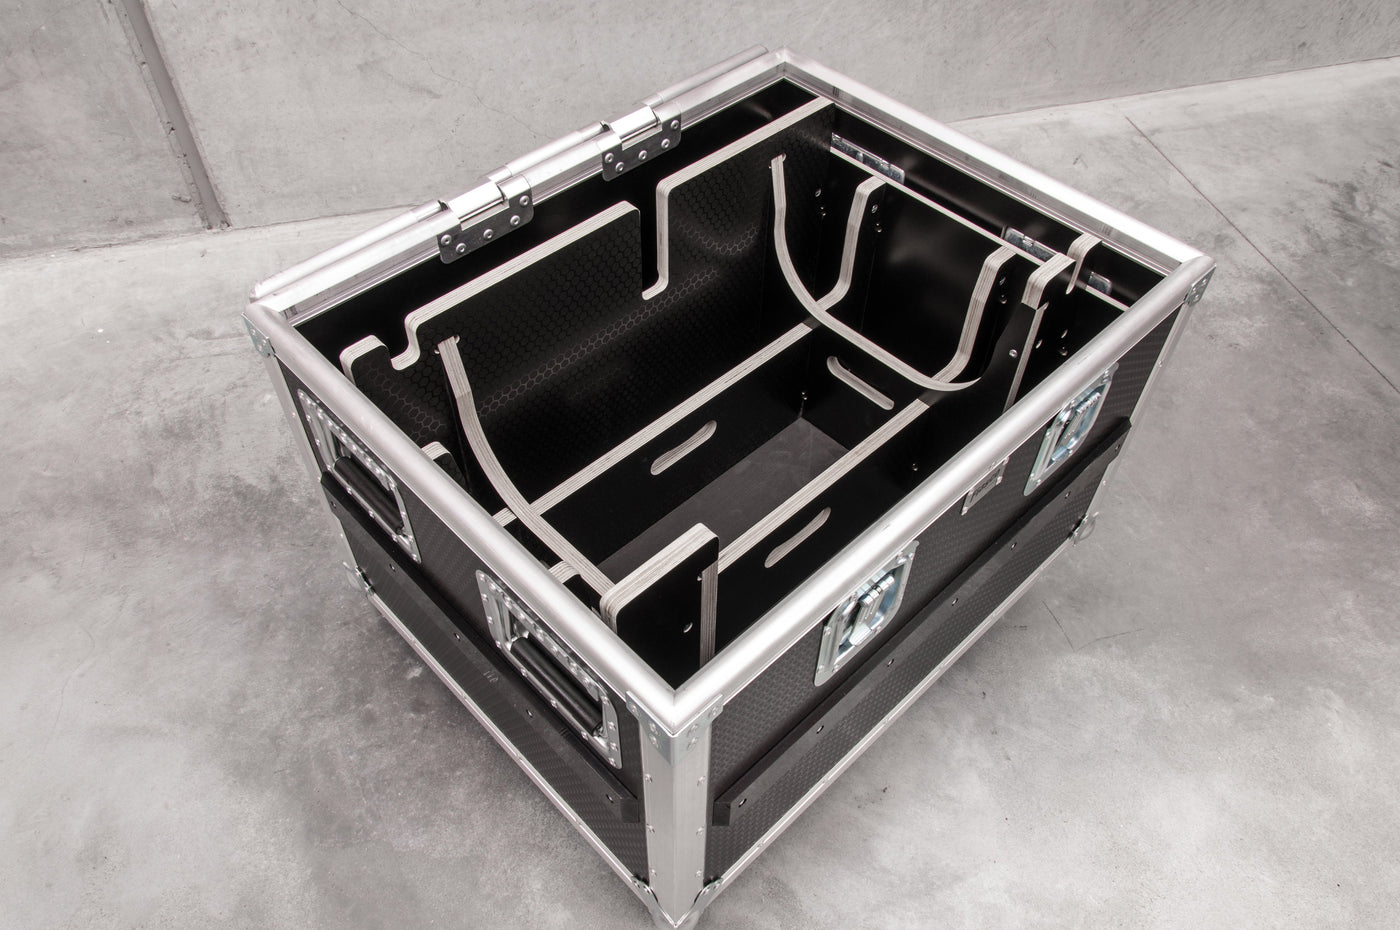 800 Low Cadillac Road Case with Chain Motor Insert